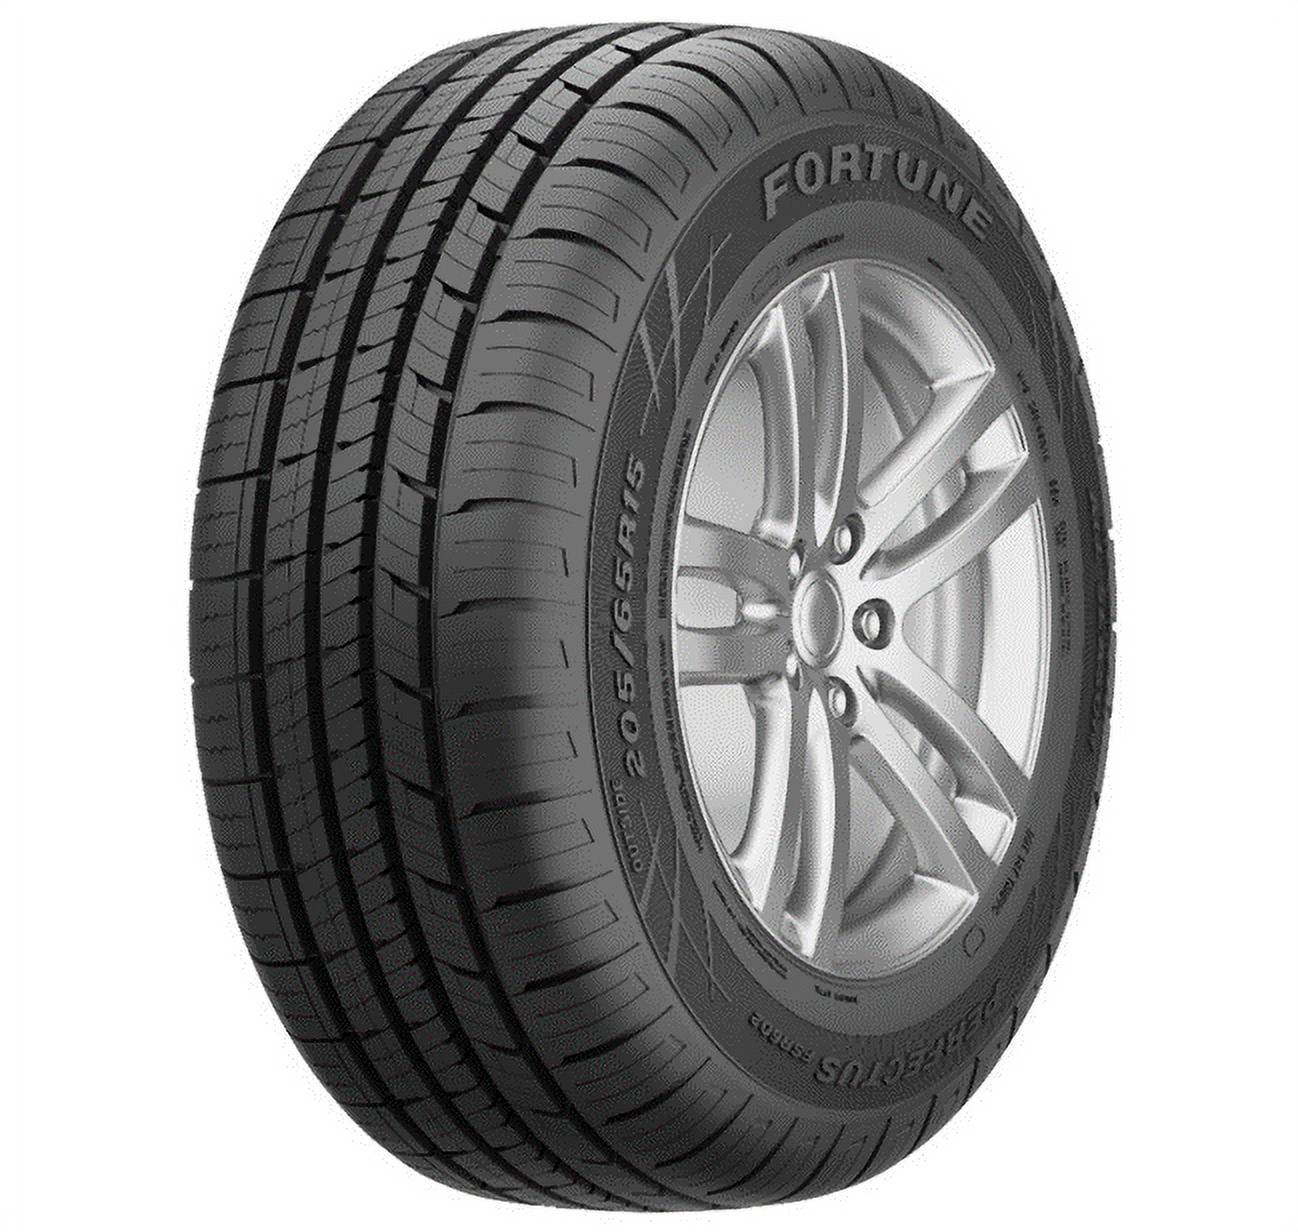 Fortune Perfectus FSR602 All-Season Touring Radial Tire-225/60R17 225/60/17 225/60-17 99V Load Range SL 4-Ply BSW Black Side Wall 